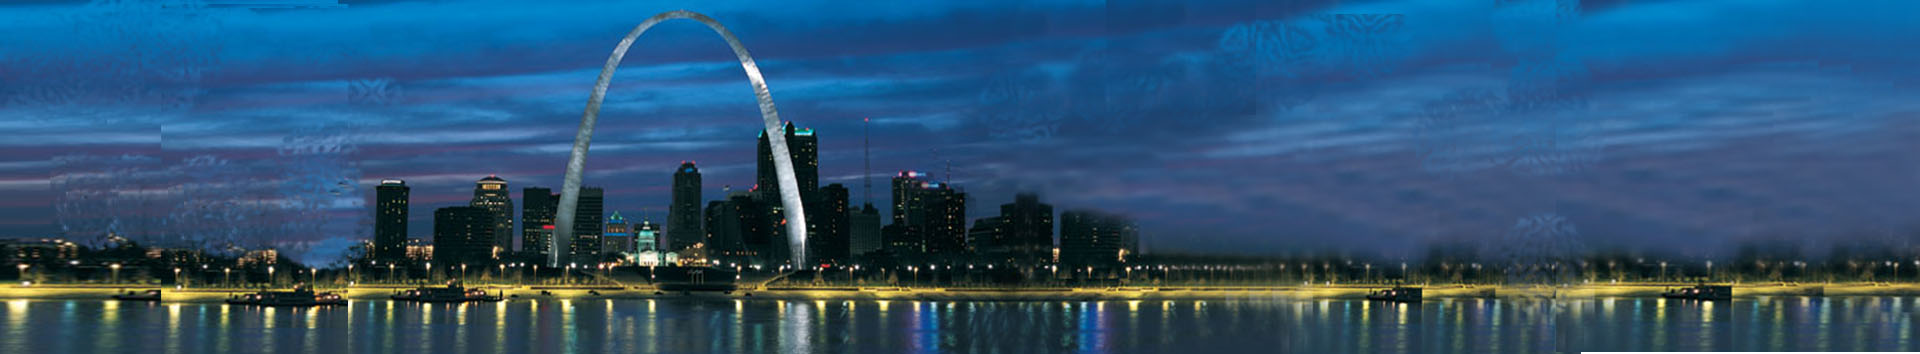 St Louis website design St Louis Metro Pages Skyline Panorama